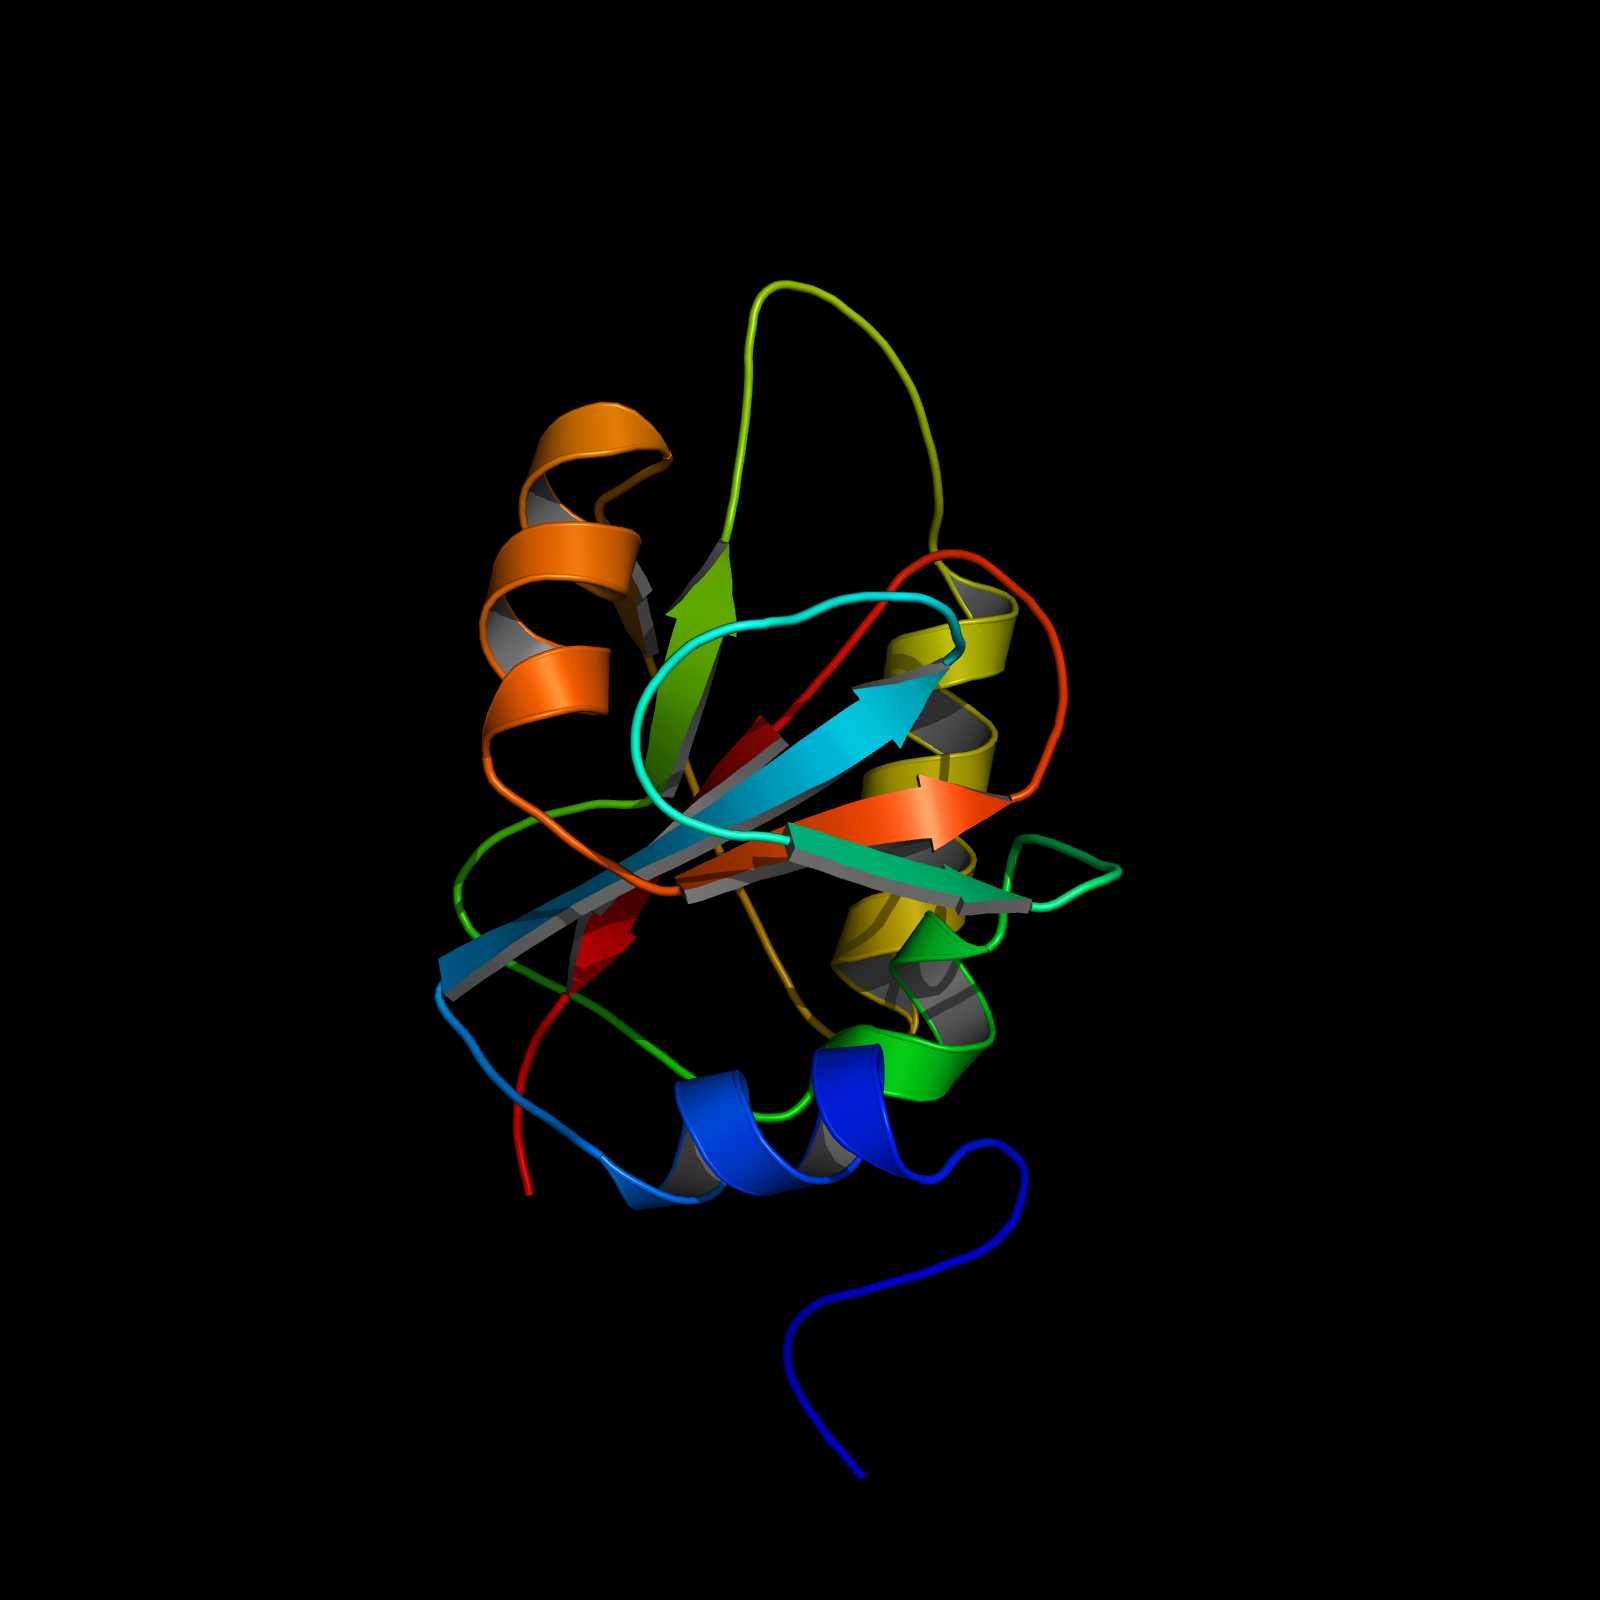 Figure 2.1 Structure of l-fucose Mutarotase after a MD simulation of 50 ns